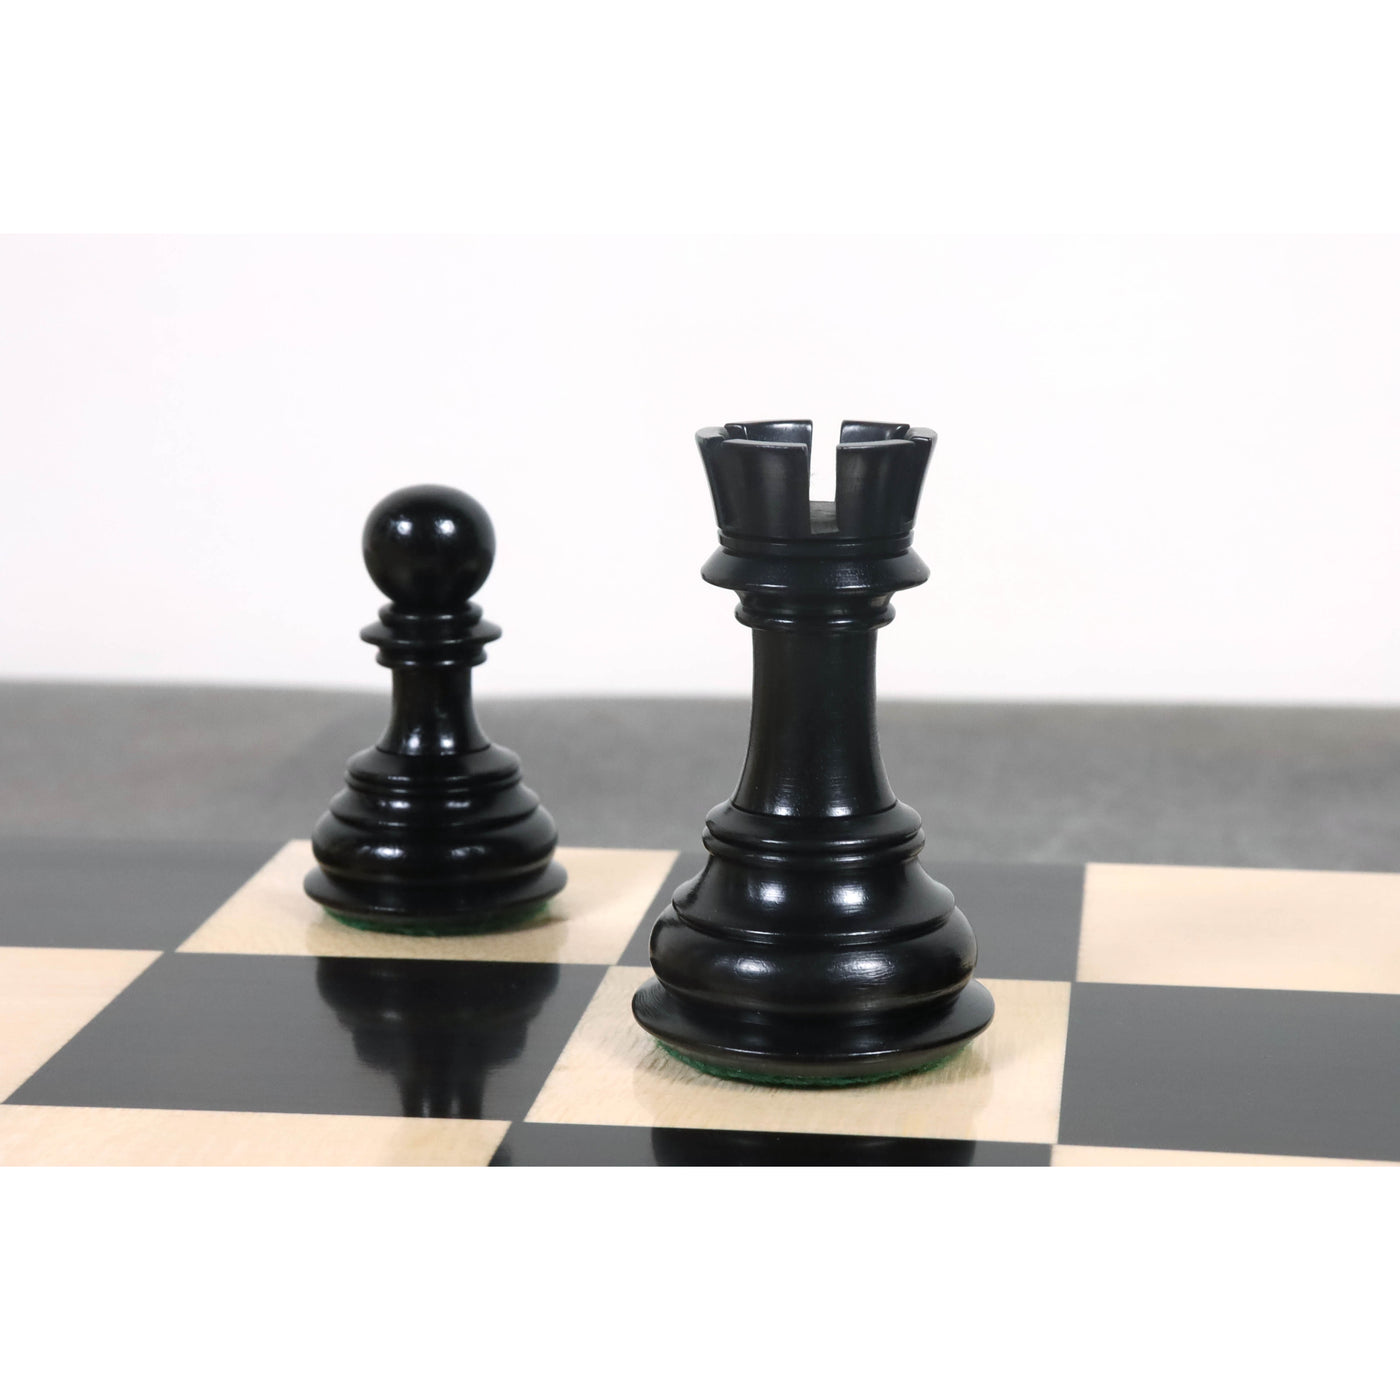 Slightly Imperfect 4.6″ Rare Columbian Triple Weighted Luxury Chess Pieces Only Set